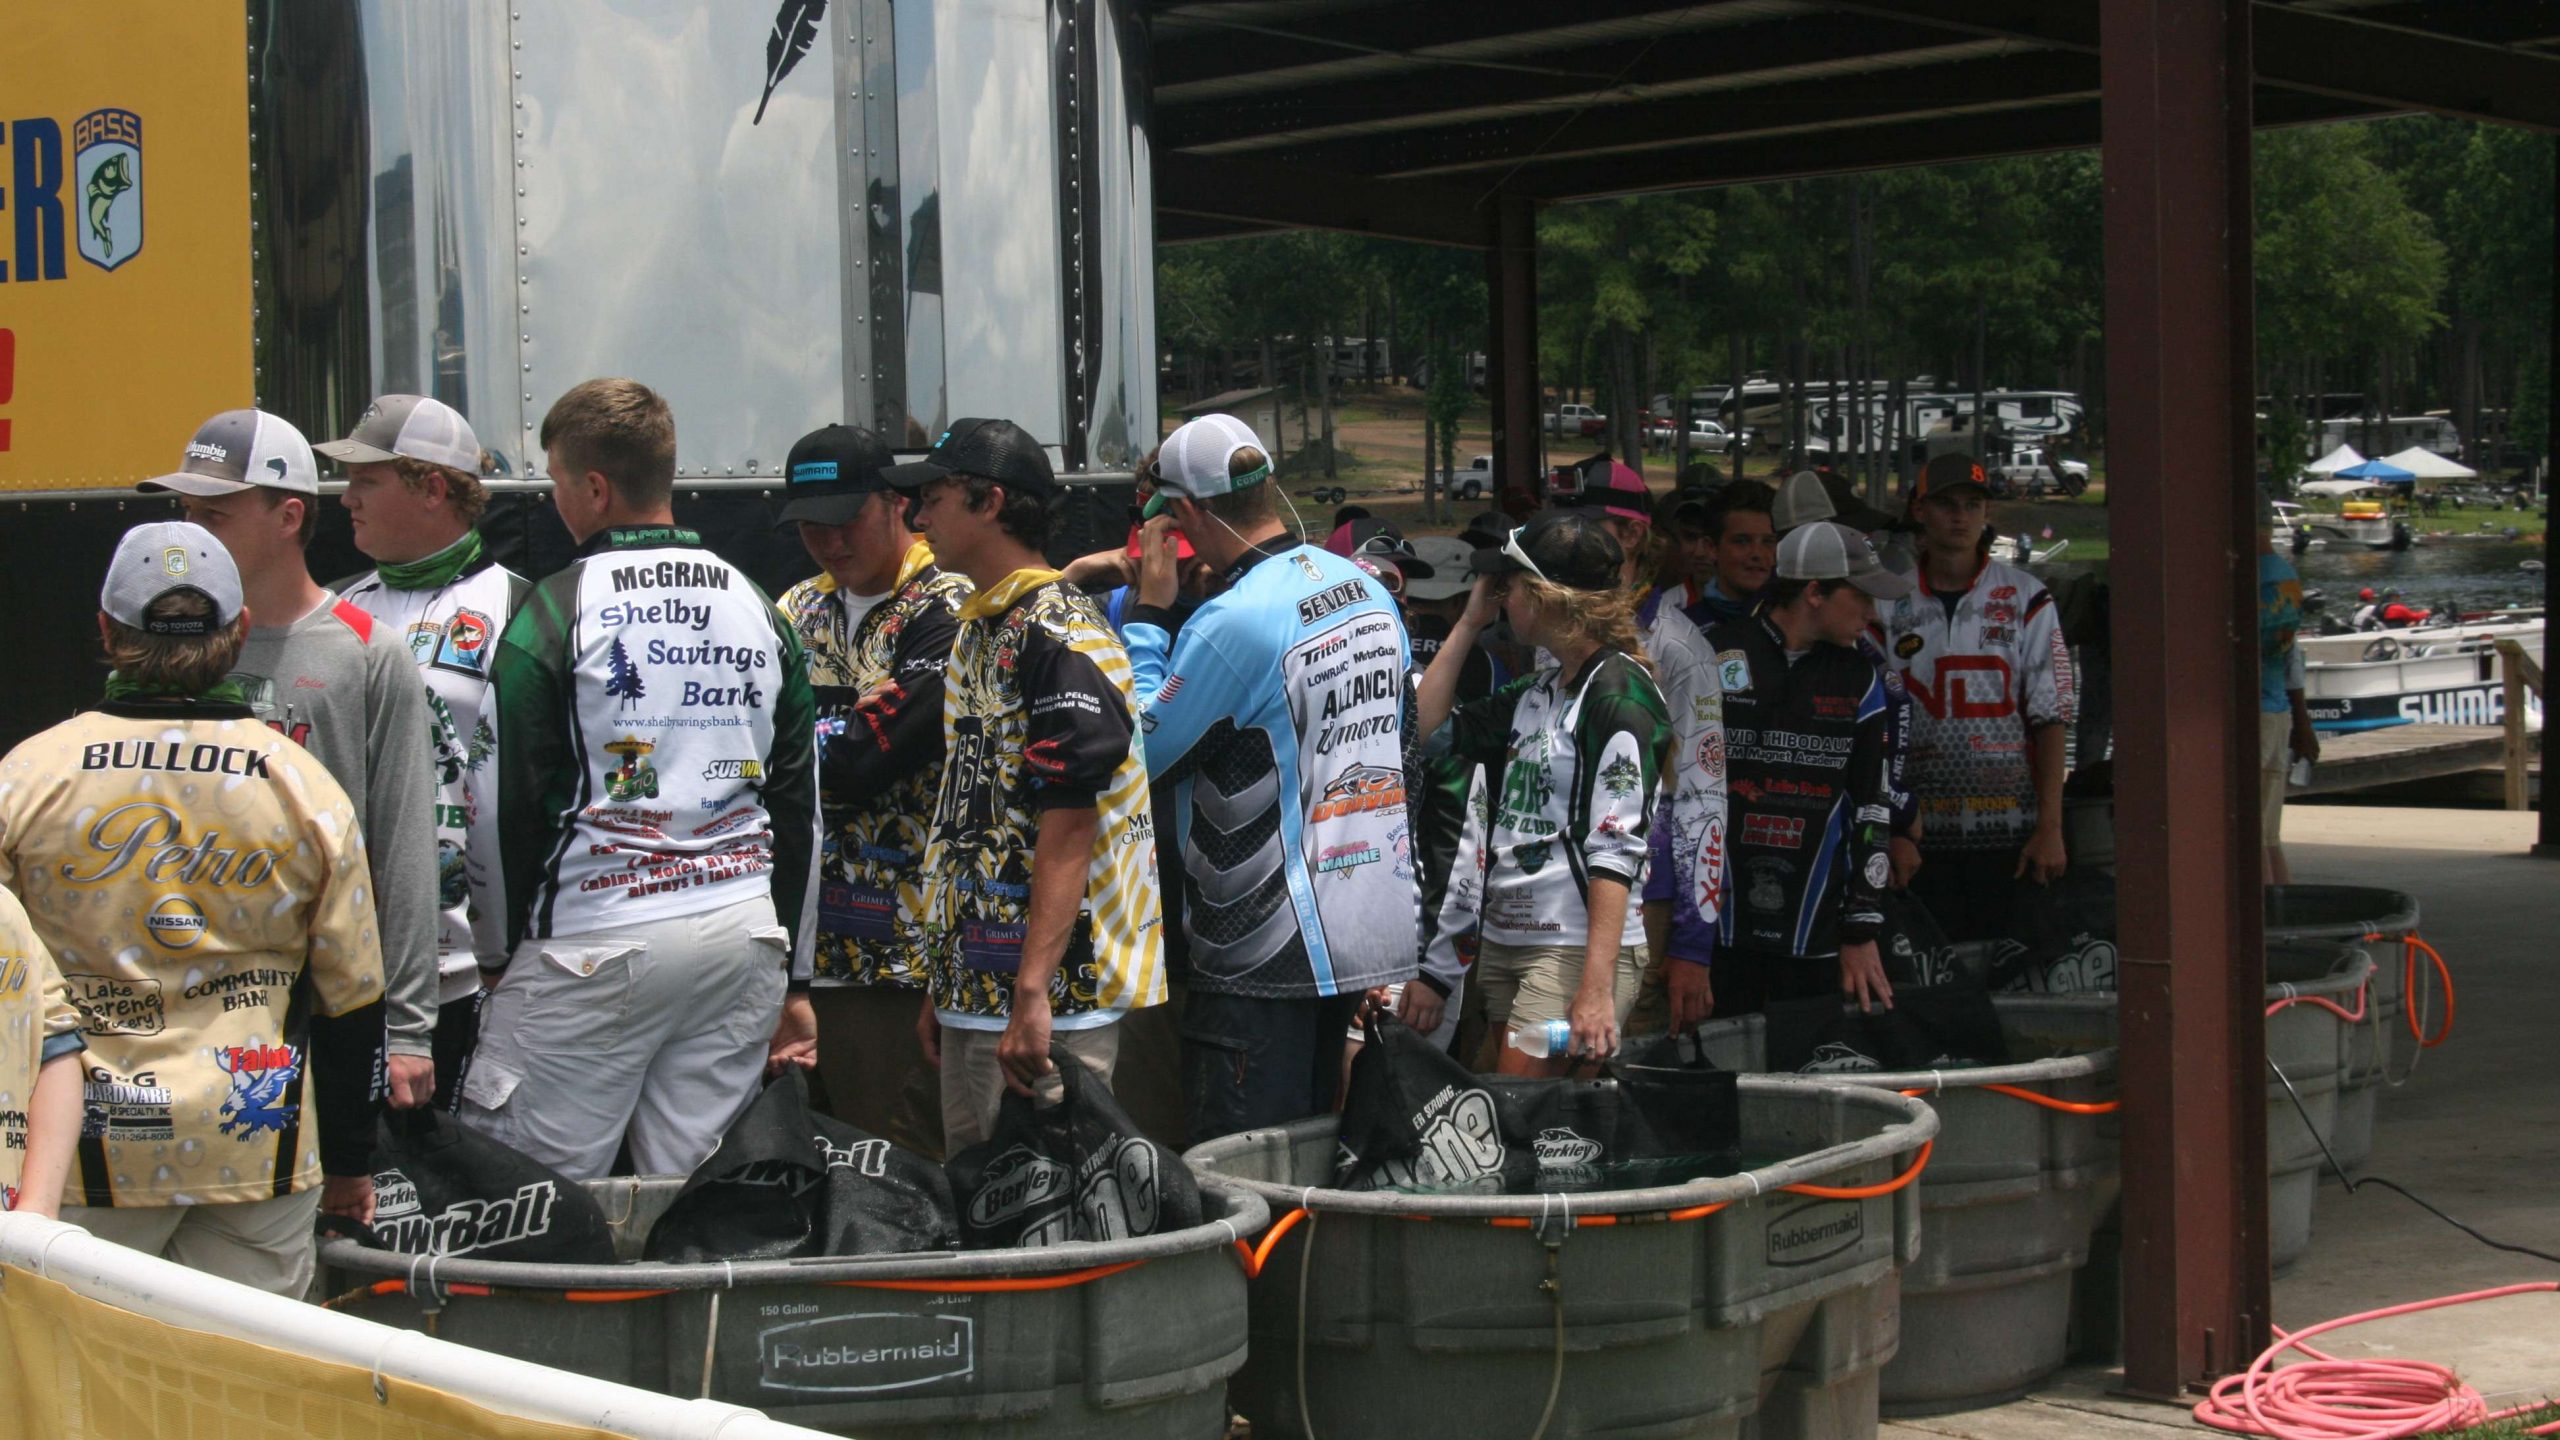 The high school anglers begin to make a long line backstage as the weigh-in is set to start.